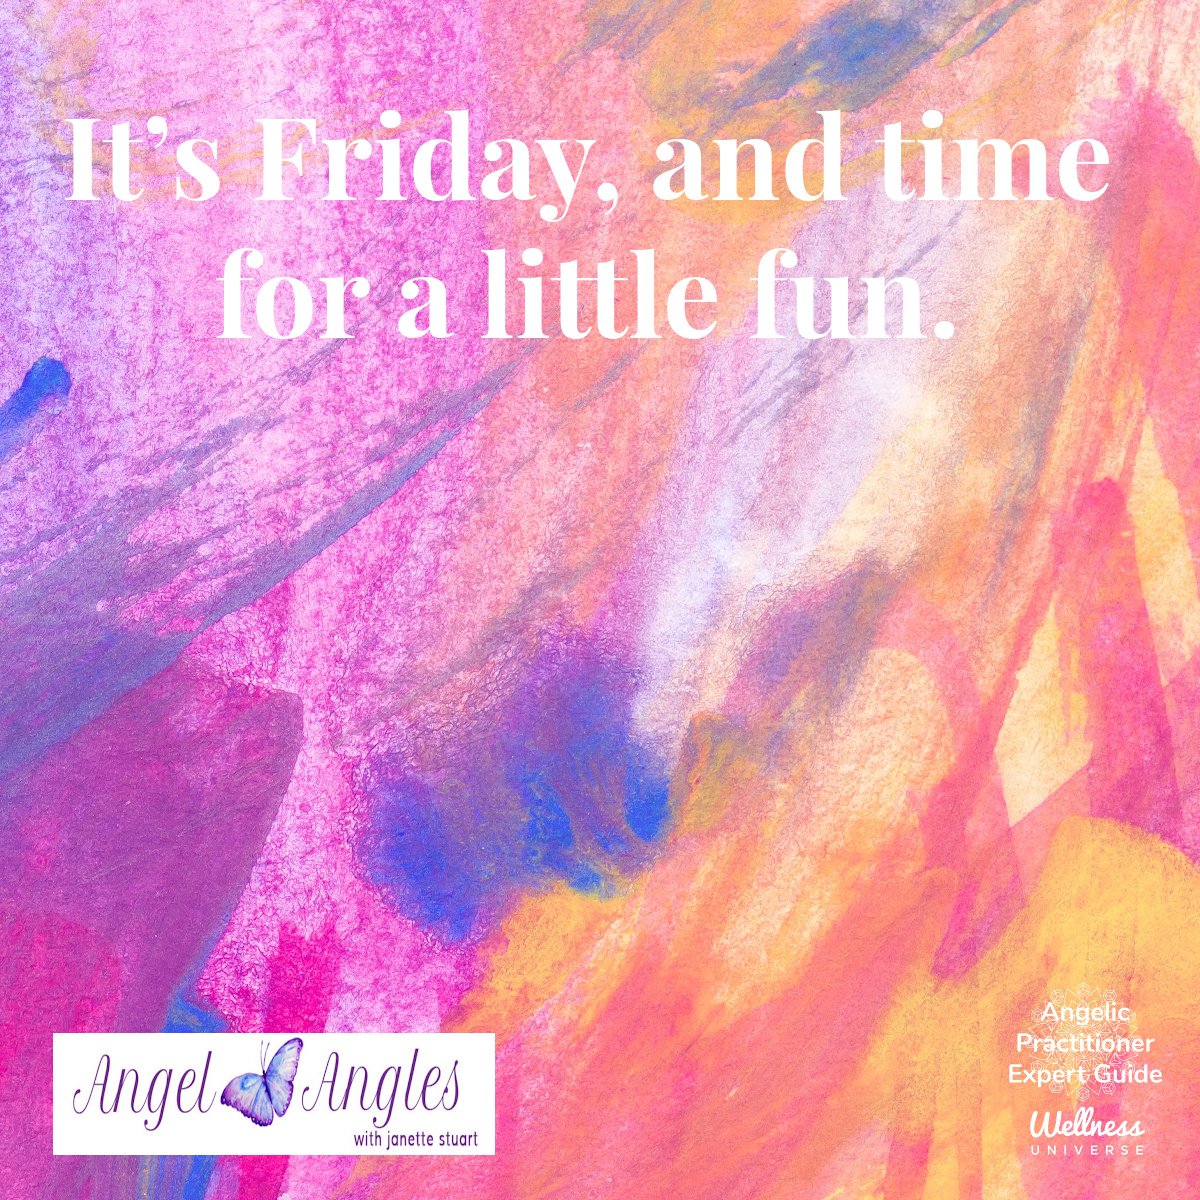 Hello and happy Friday, May 3, 2024. Here's your daily Angel Affirmation. 

It's Friday, and time for a little fun. 

Blessings of love, joy, and peace.
Love,
Janette
.
.
#WUVIP #WUWorldChanger #Friday #FridayFunDay #AngelAffirmations